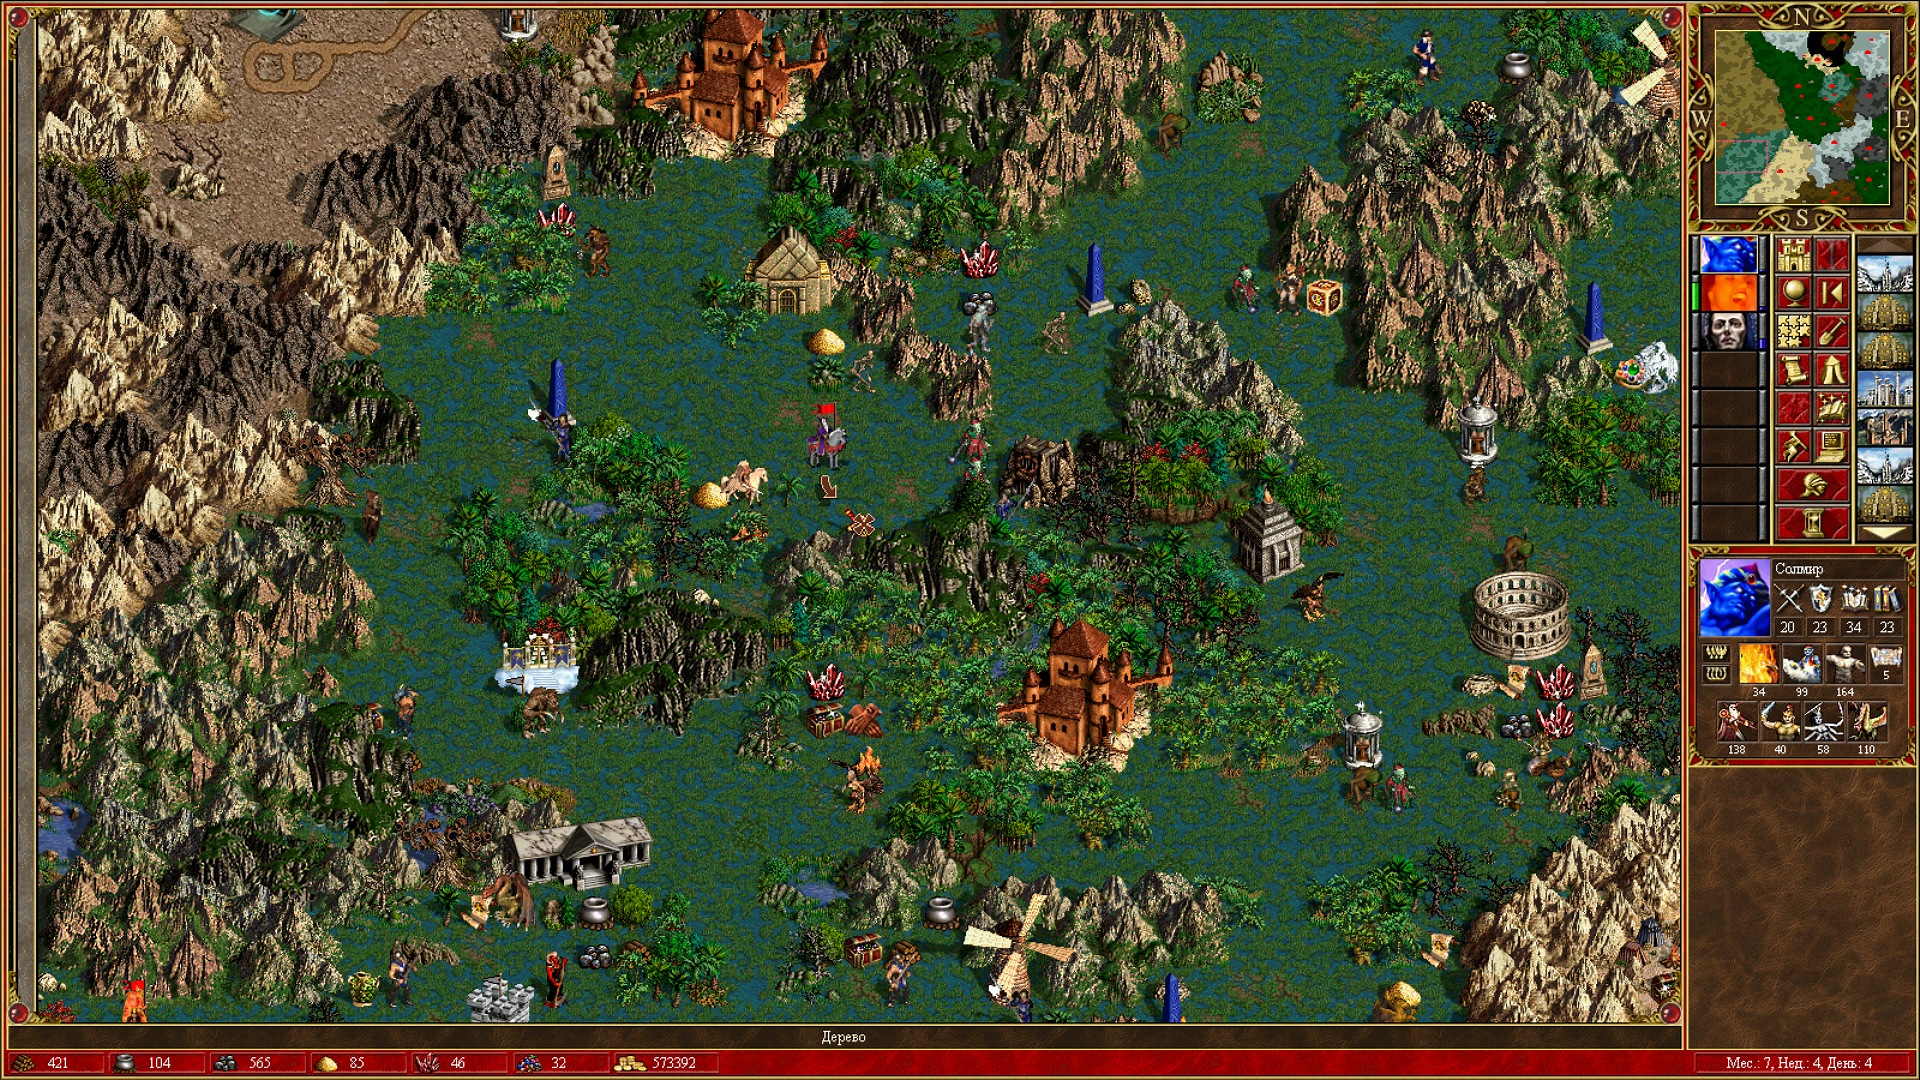 Heroes of might and magic 3 карты. Герои меча и магии 1999. HOMM 3. Heroes of might and Magic 3 герои. Герои 3 1999.